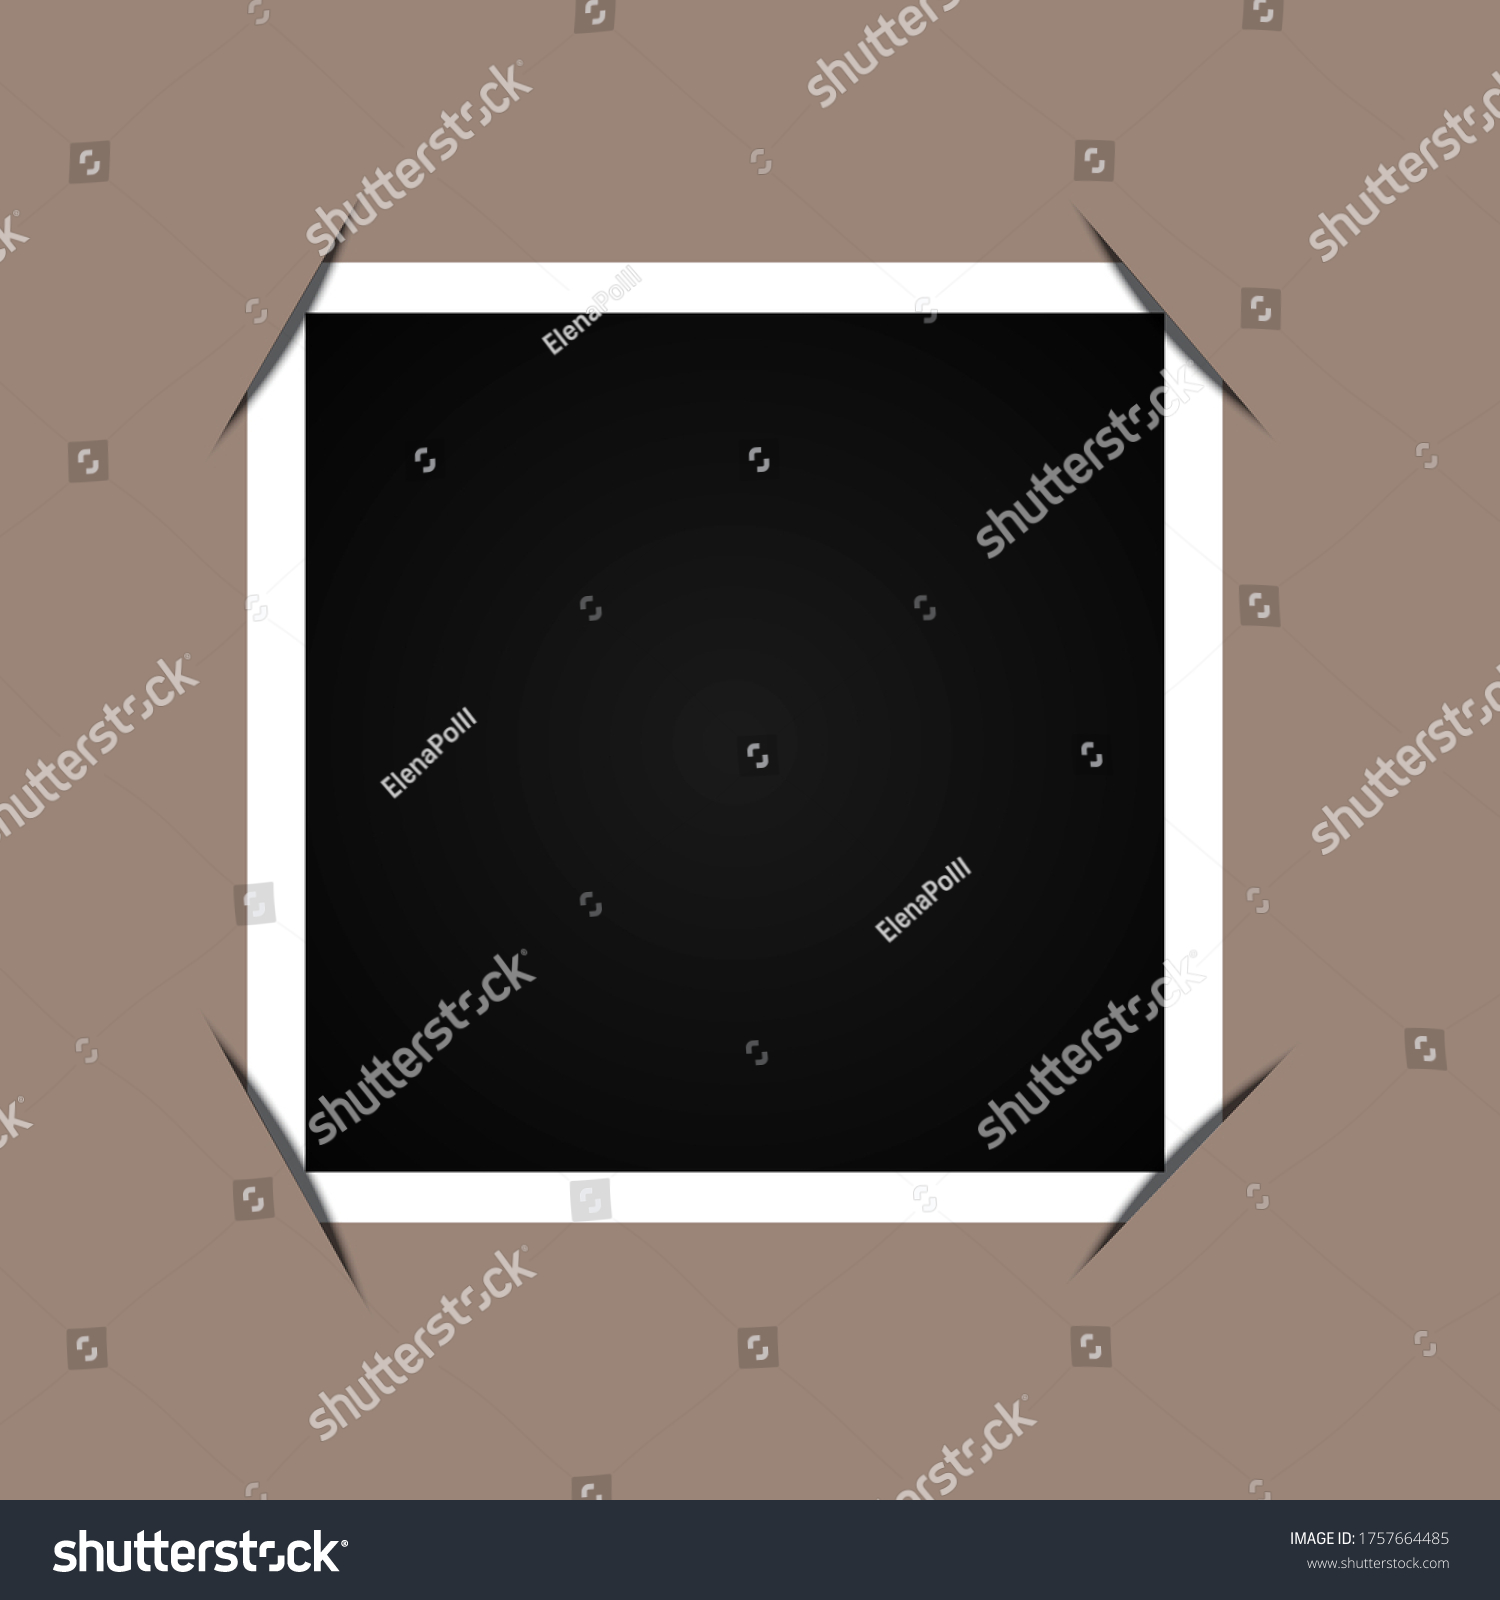 SVG of Photo framed with tucked corners. Paper blank picture. Spectacular grunge image. svg